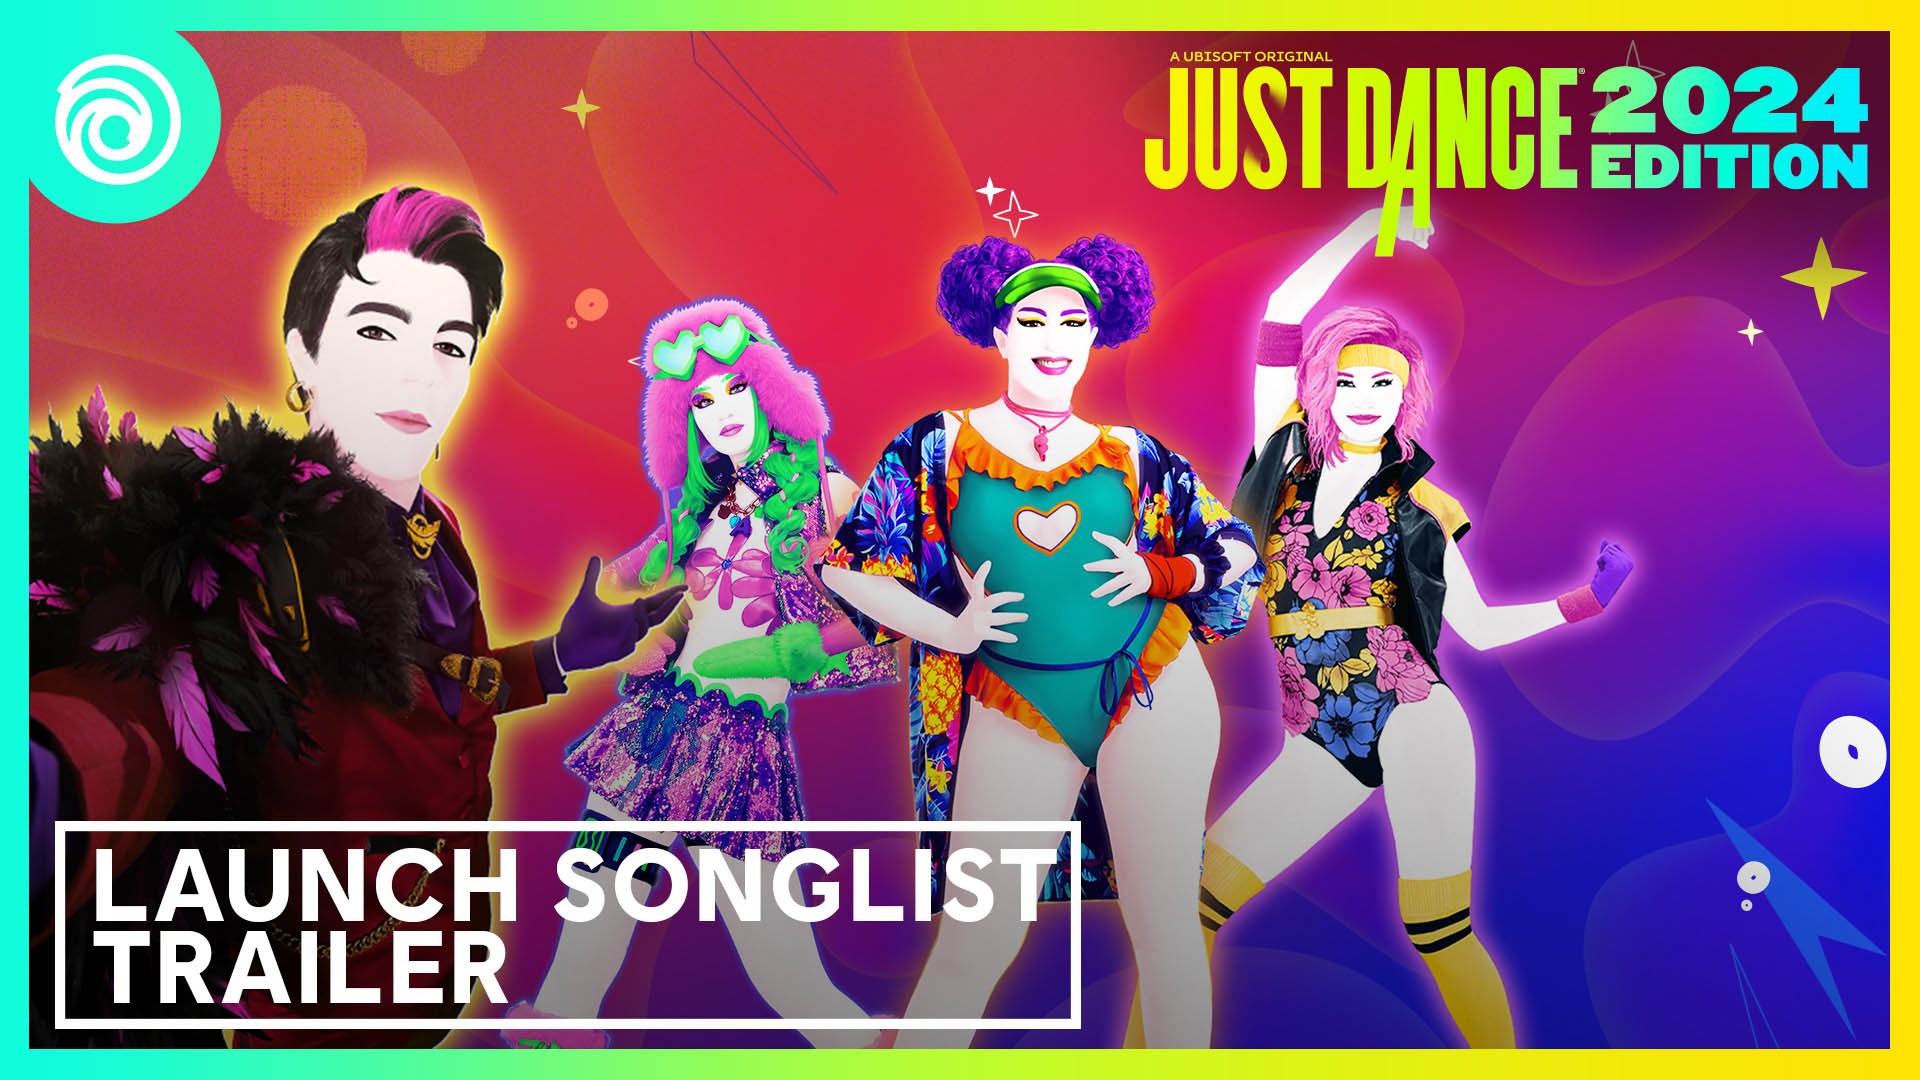 Just Dance 2024 Edition on X: and they were roommates https